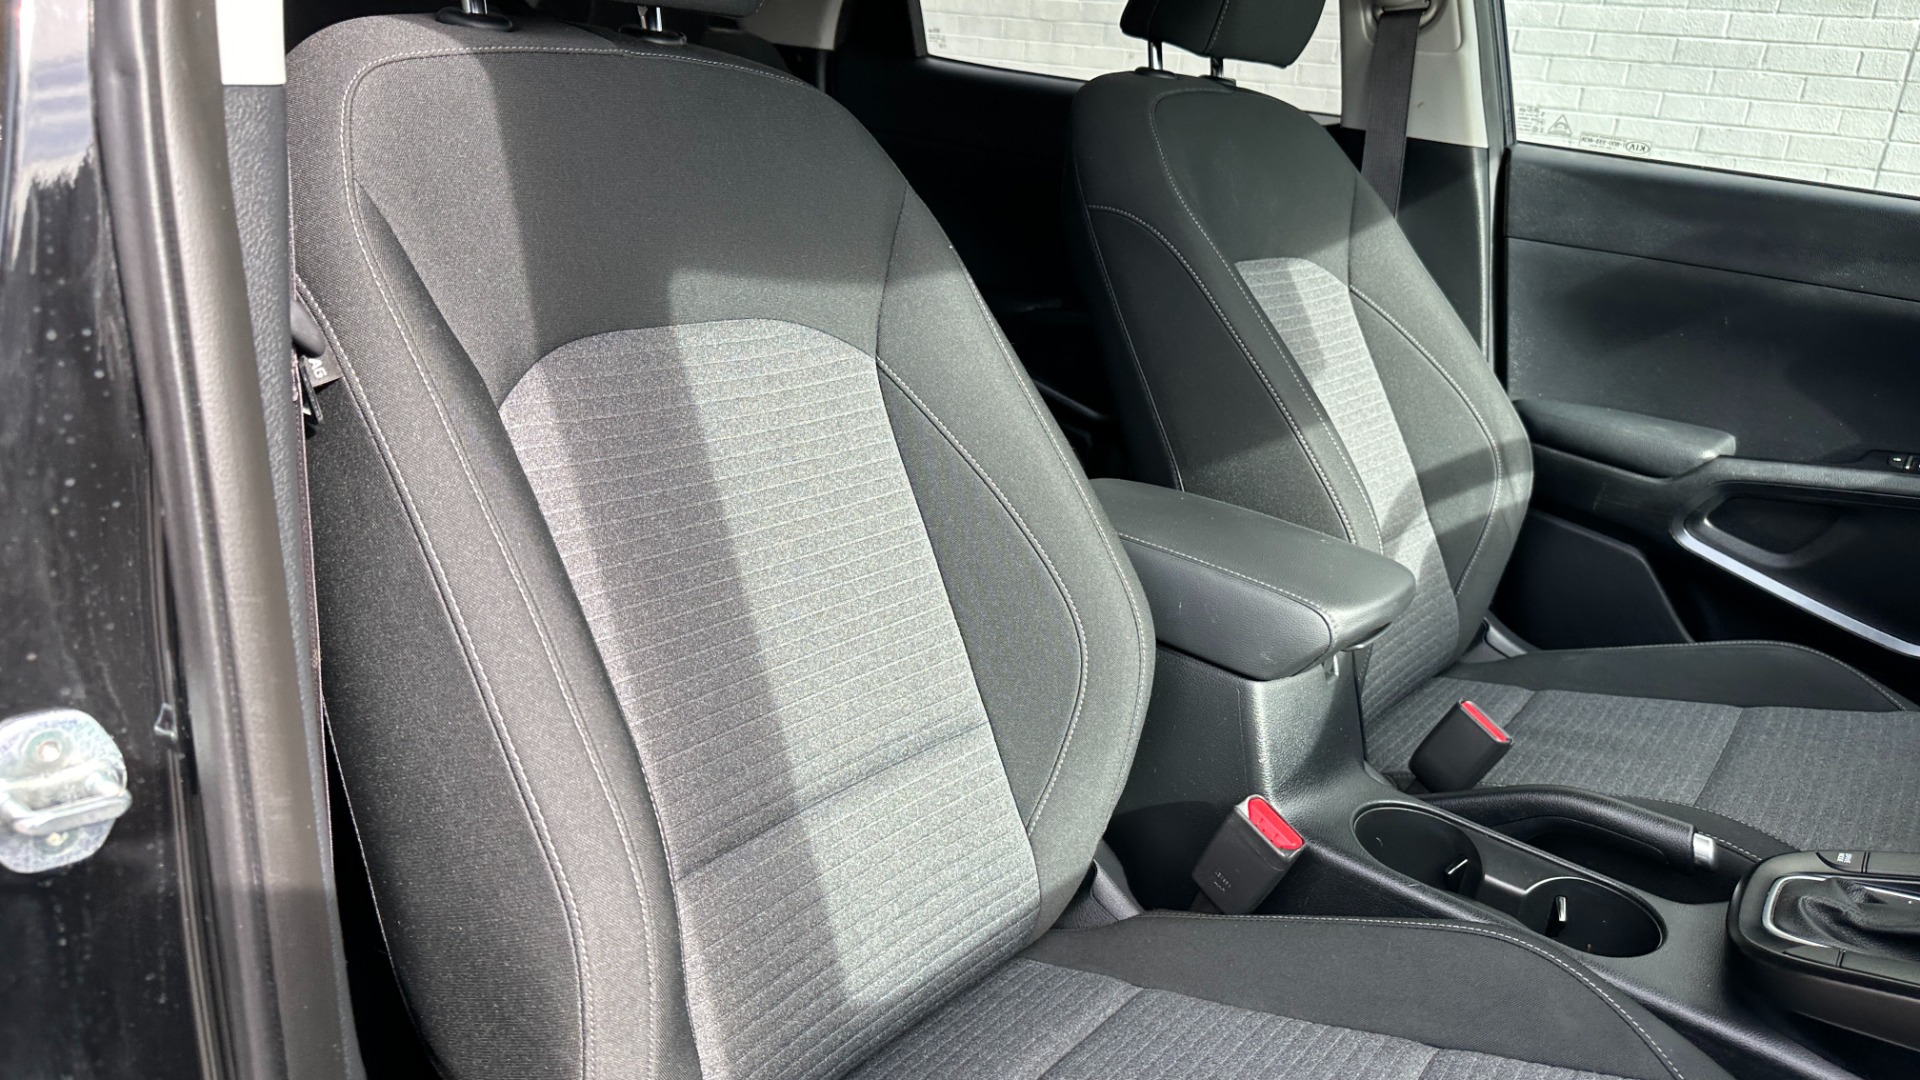 Used 2021 Kia Soul LX / RADIO DISPLAY / 4CYL ENGINE / CARPET FLOOR MATS for sale $17,995 at Formula Imports in Charlotte NC 28227 34